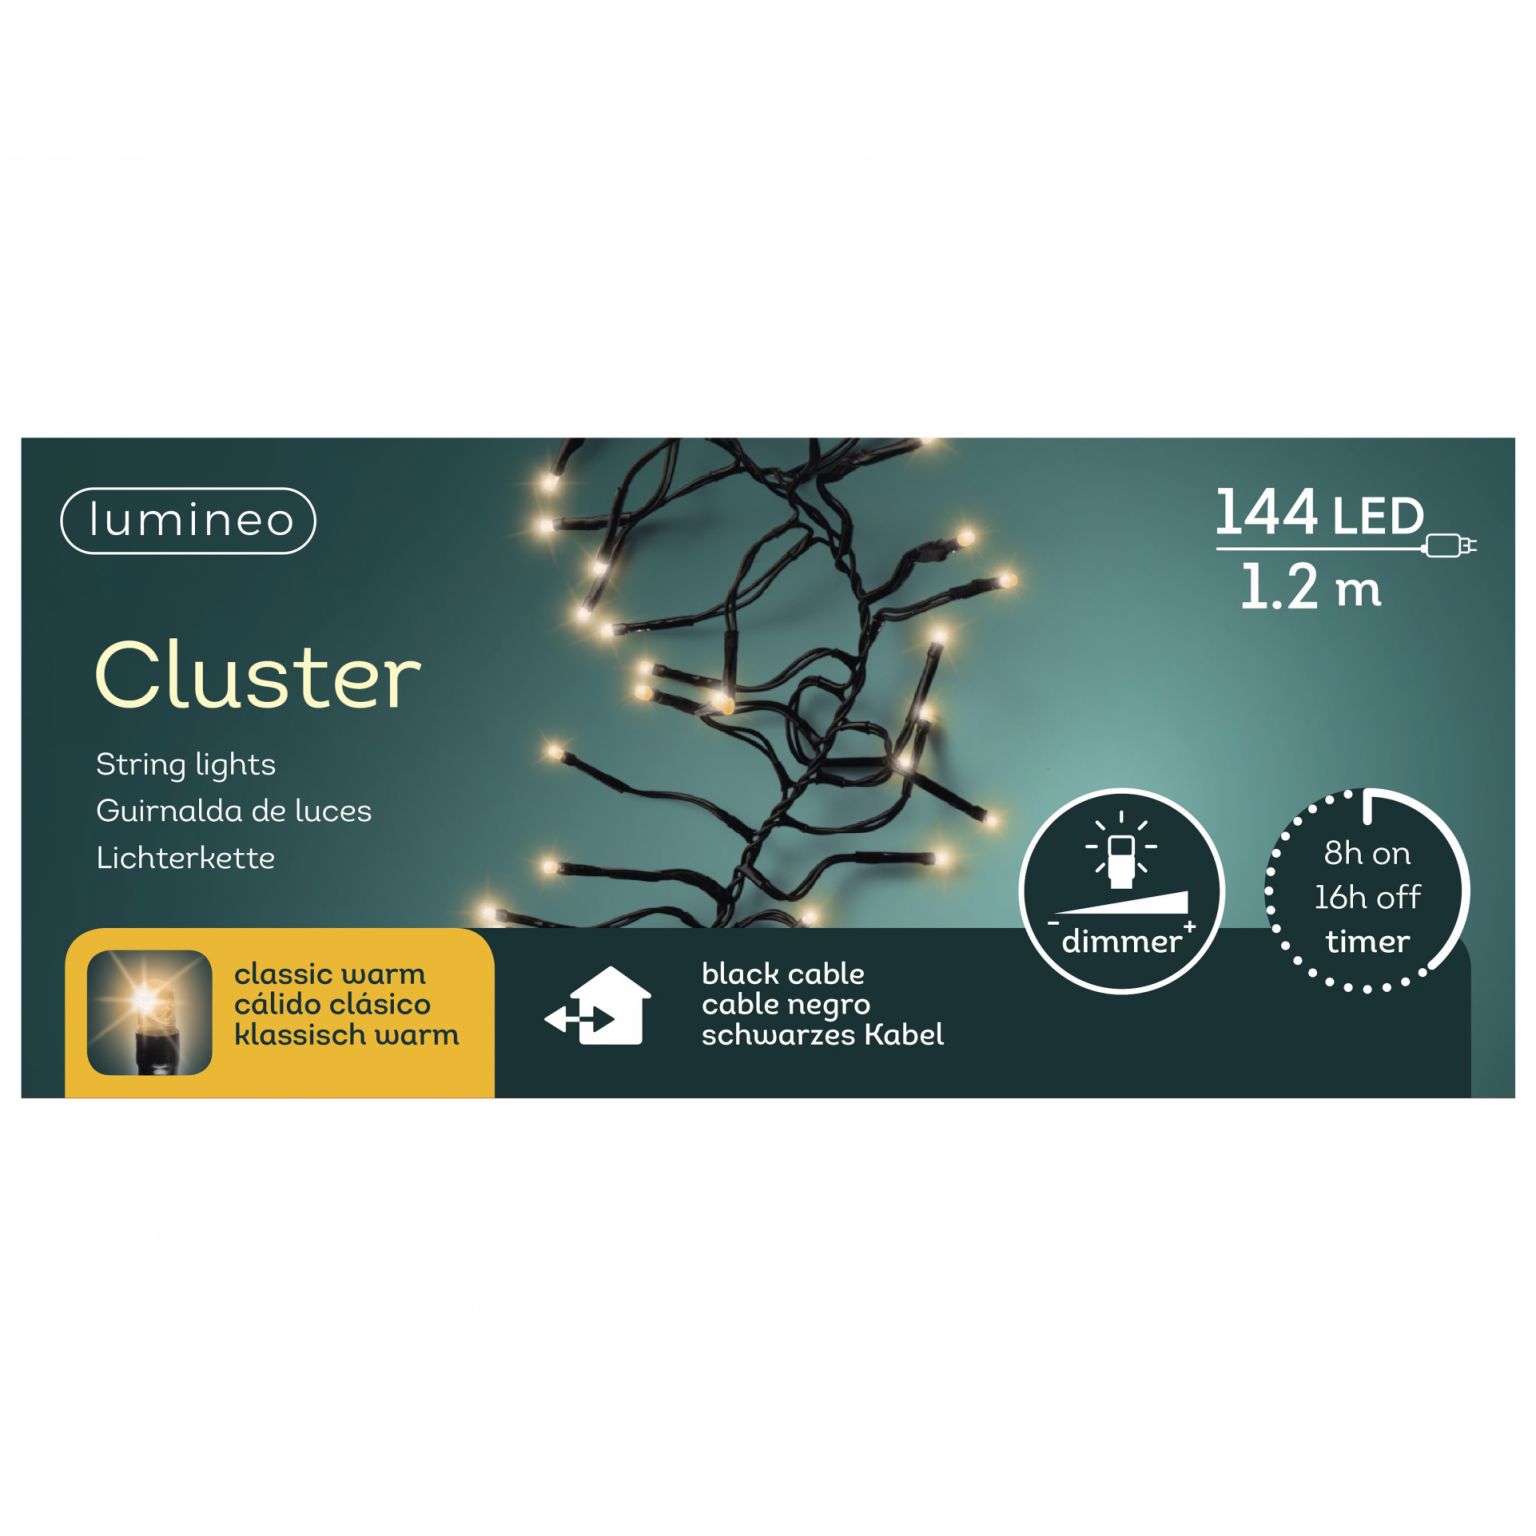 Clusterverlichting lumineo 144-lamps LED 'classic warm